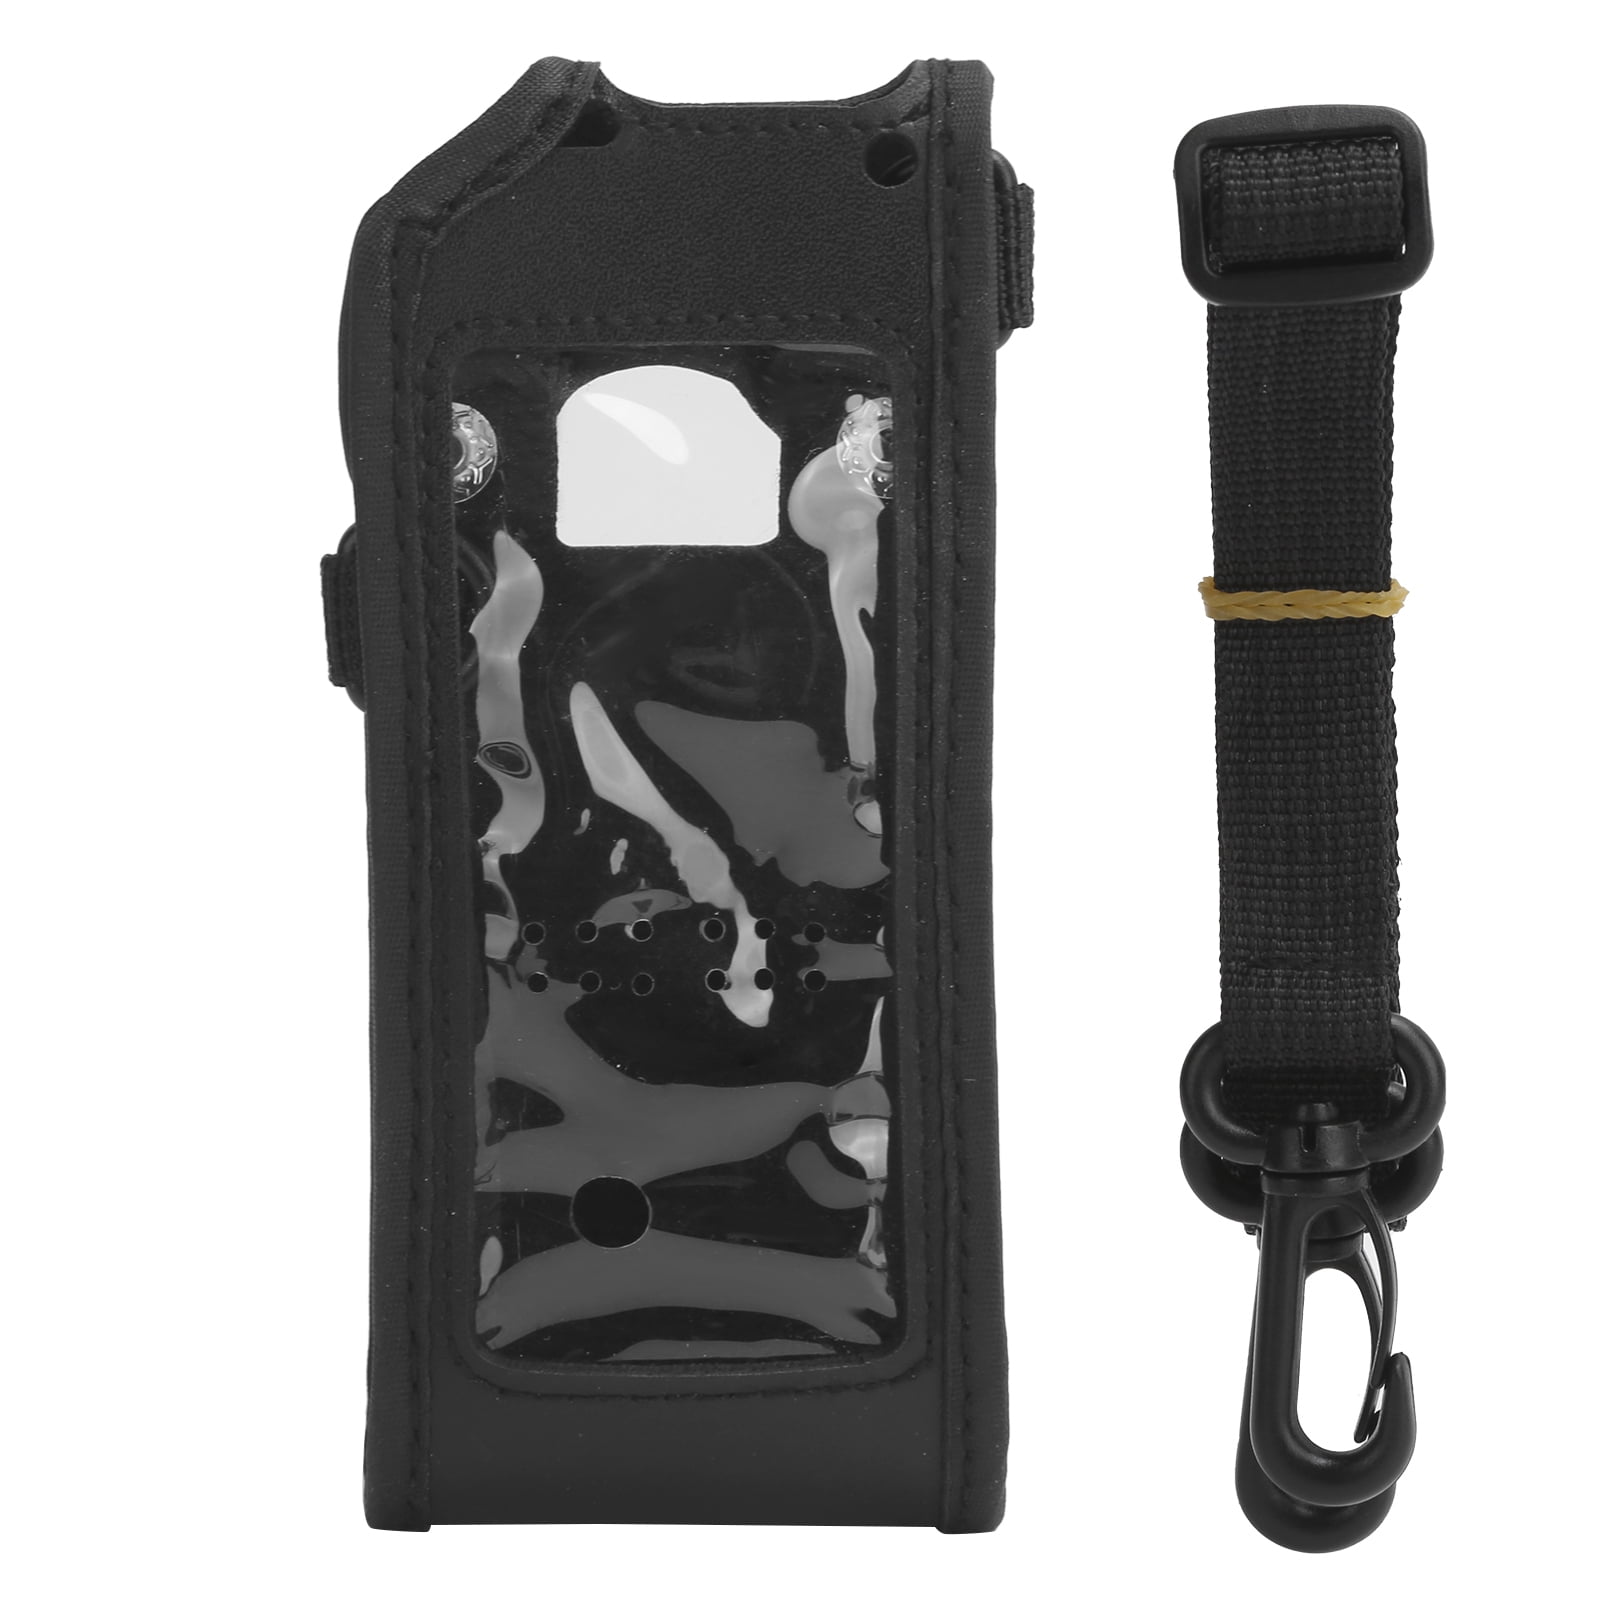 for Anytone AT-D878UV Walkie-Talkie Case Twoway Radio Protection Soft Cover with a Lanyard Walkie Talkie Cover Protector